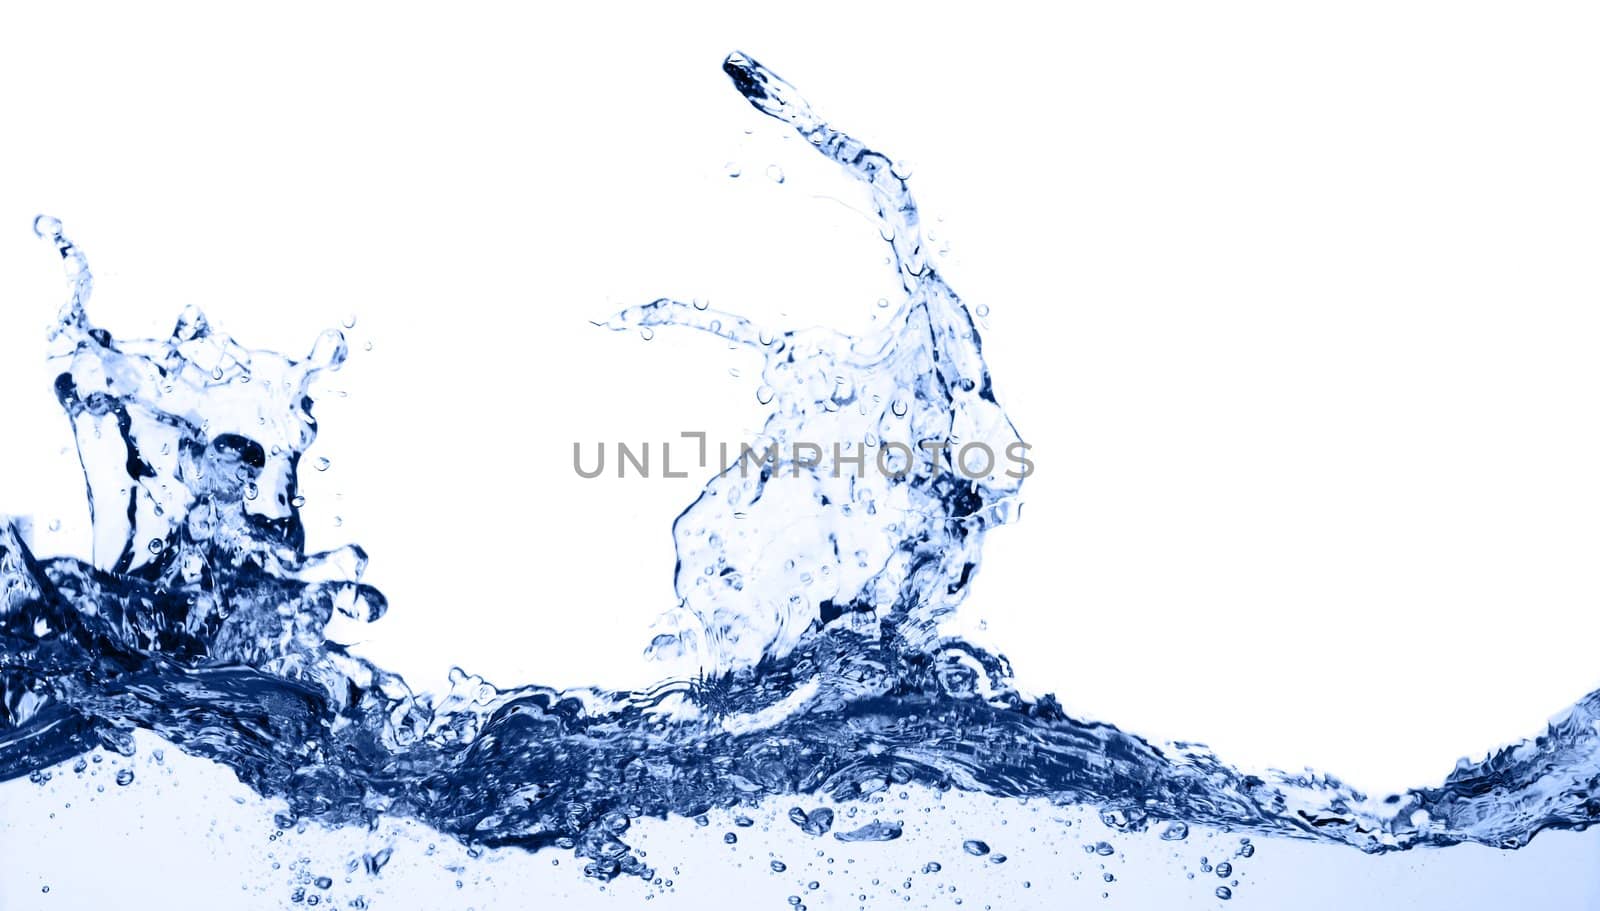 Crisp, clear, blue water photographed against a white background.